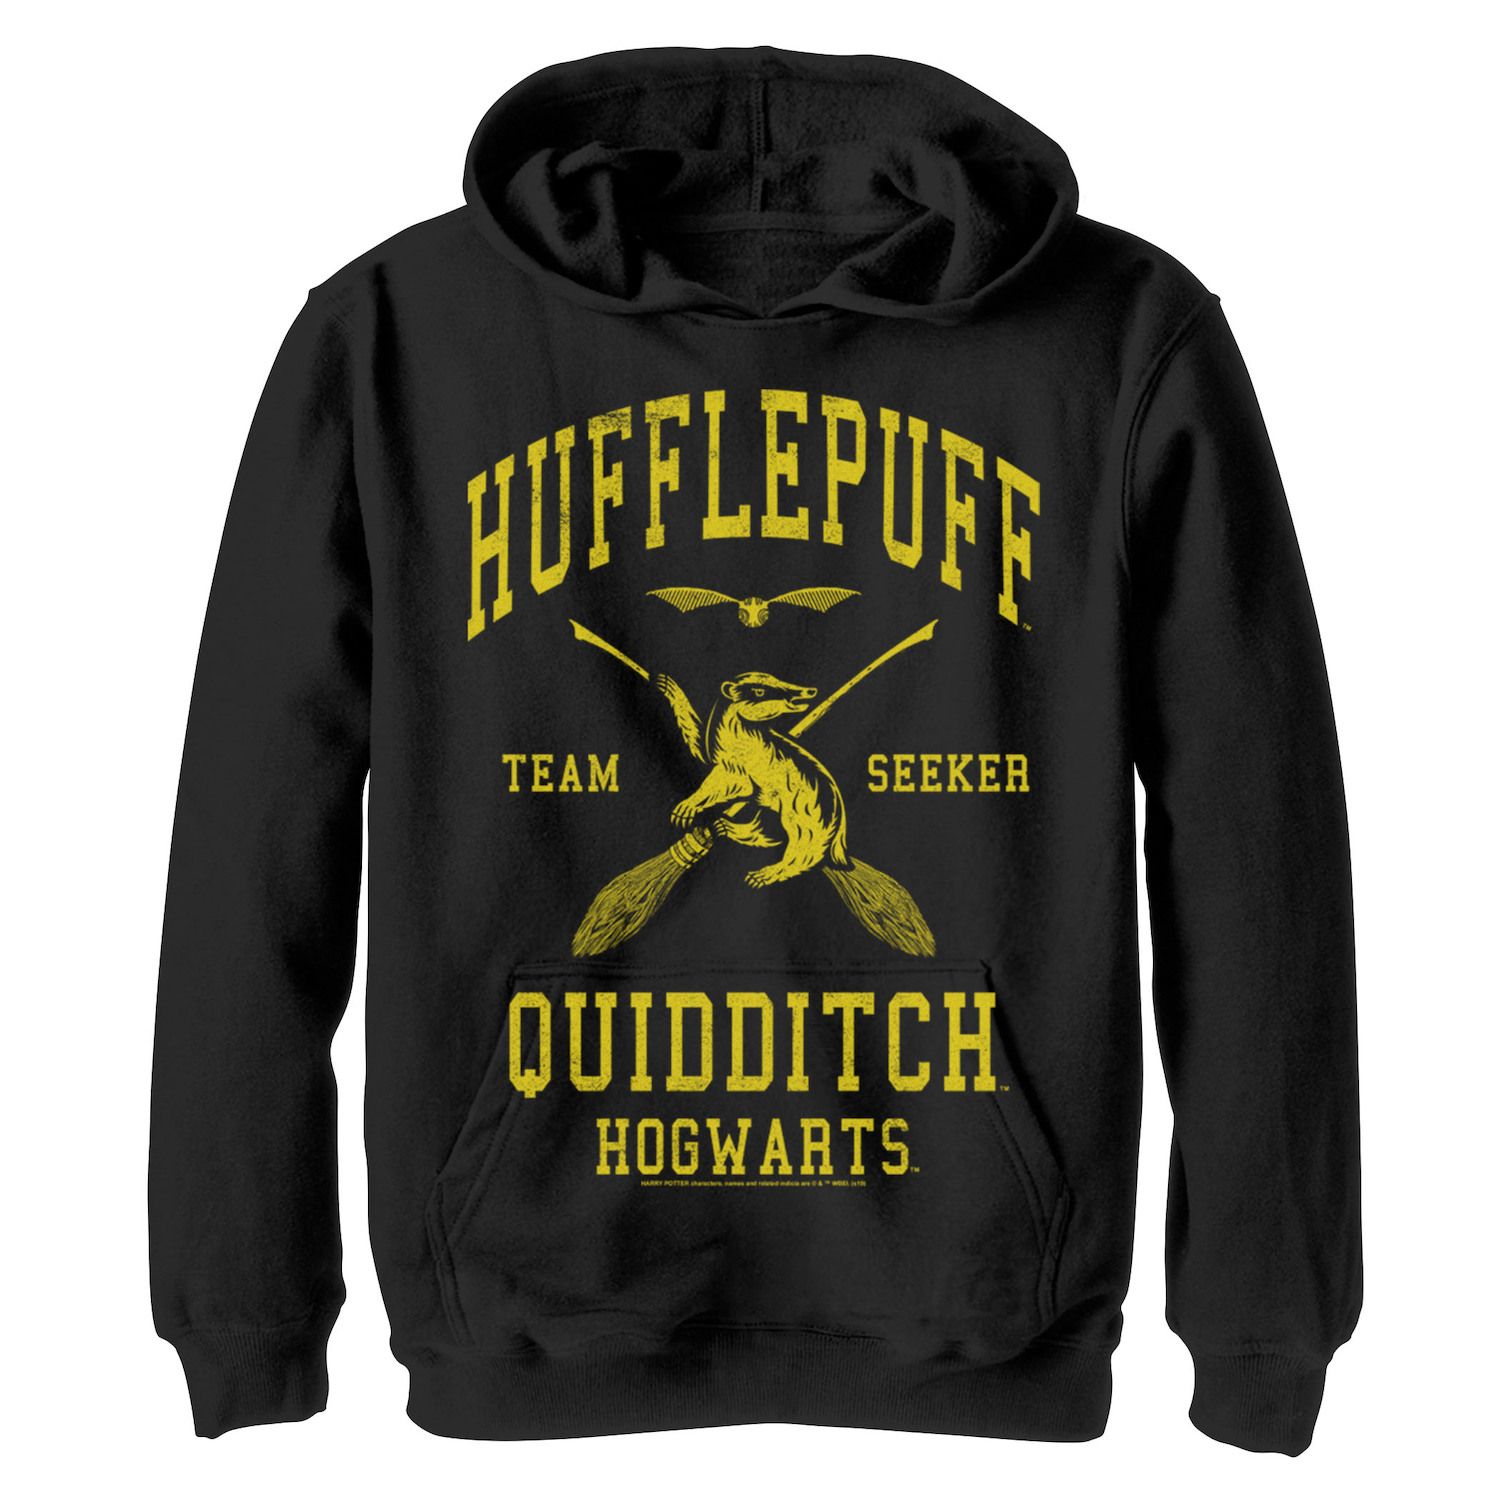 Image for Harry Potter Boys 8-20 Hufflepuff Quidditch Team Seeker Graphic Fleece Hoodie at Kohl's.